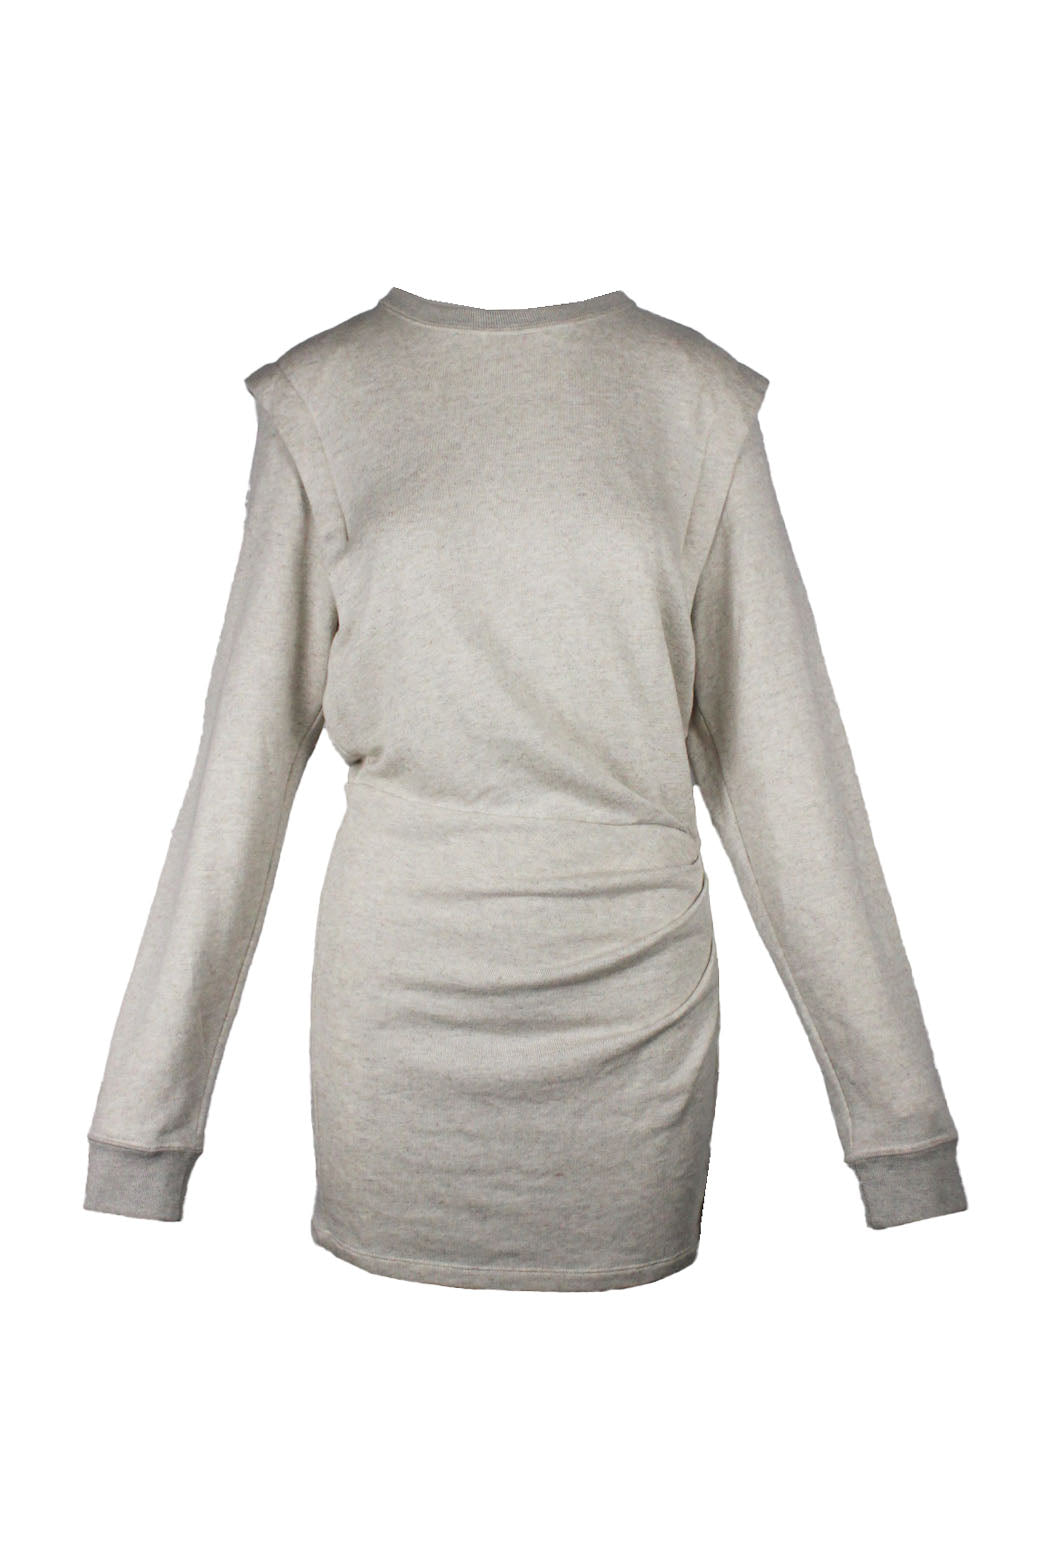 front of isabel marant etoile gray long sleeve sweatshirt mini dress. features crew neckline, dropped shoulders, banded ribbed trim, draped detail at waist, and pull on style. 